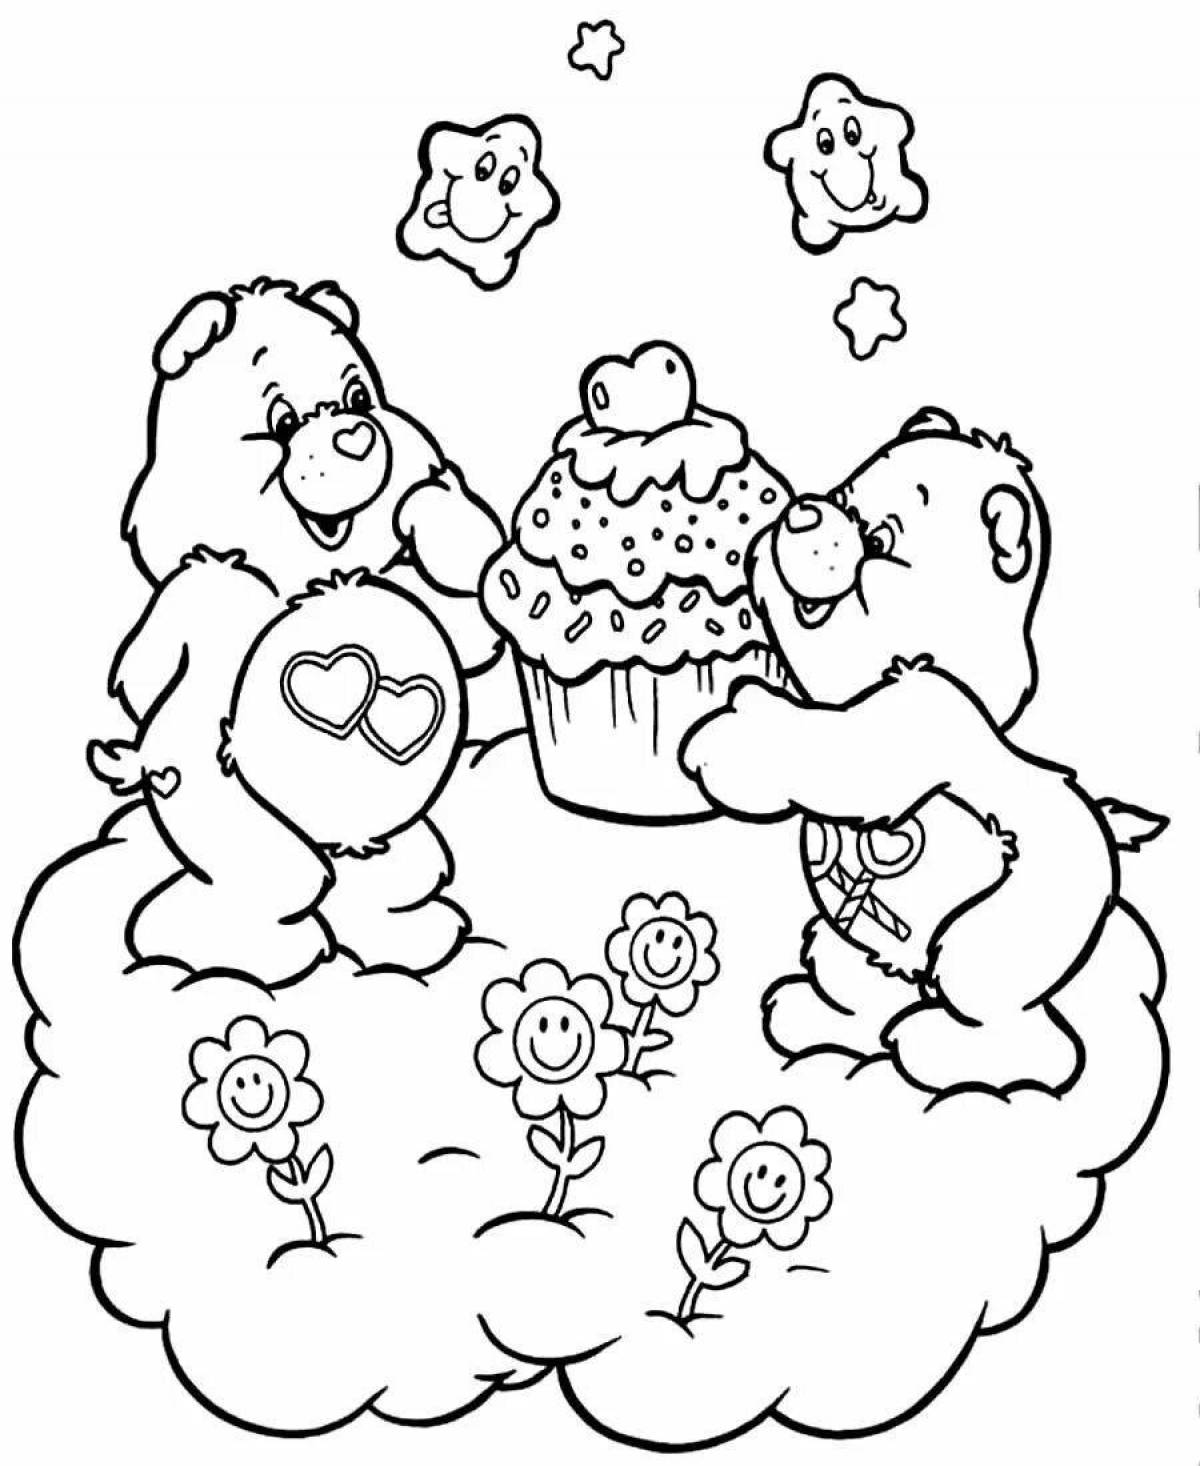 Two greedy teddy bears adorable coloring book